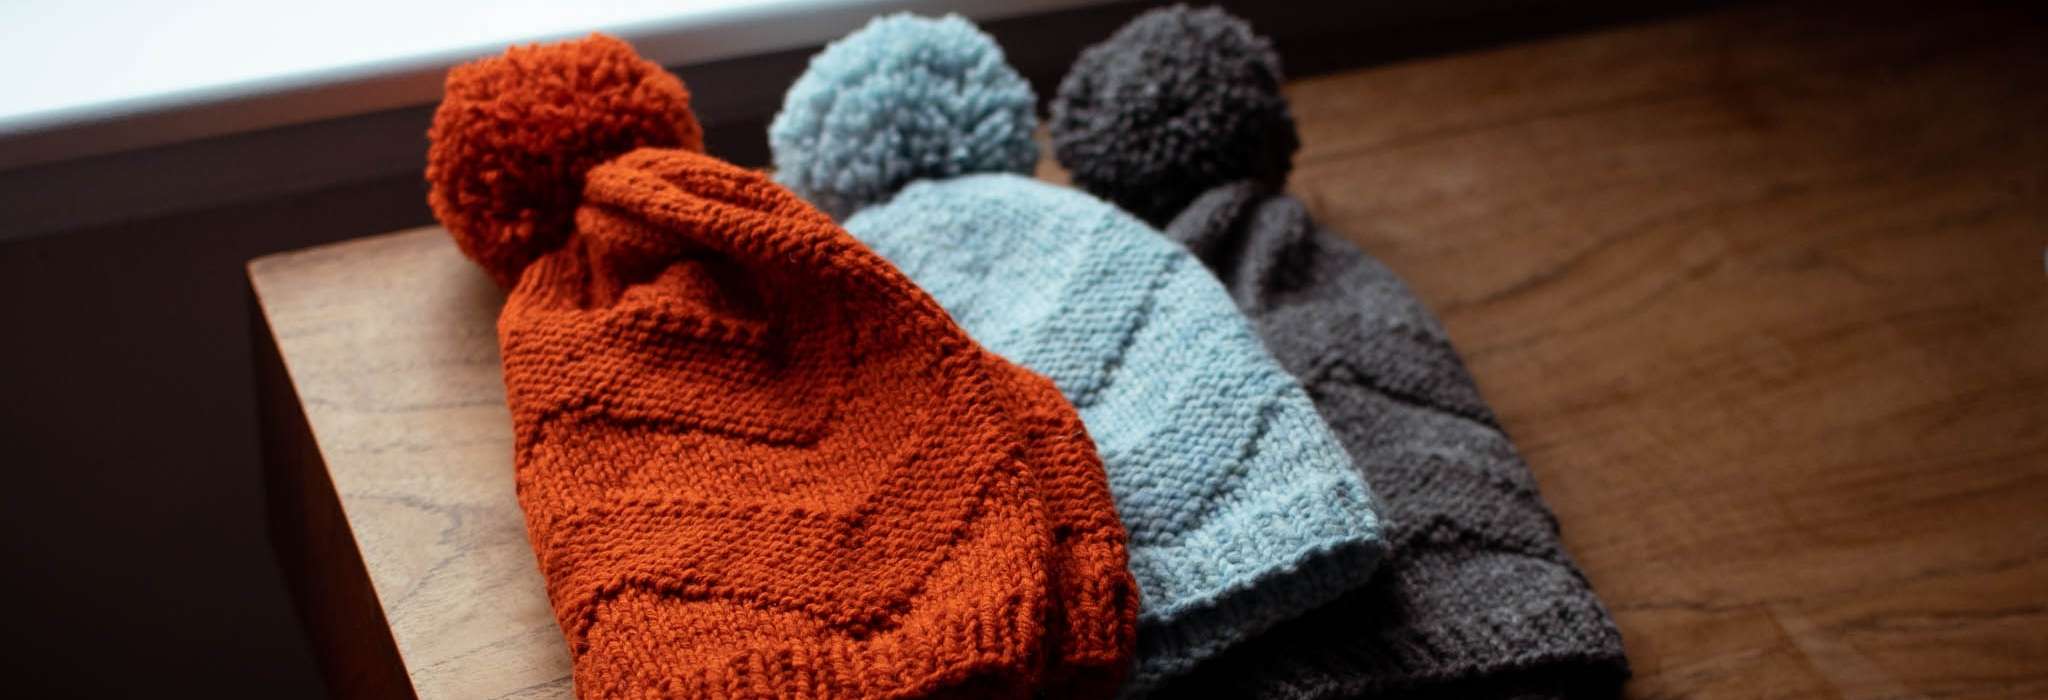 Three beanie hats in orange, blue and grey lie overlapping each other on a wooden table. They have pom poms and a chevron stitch pattern.